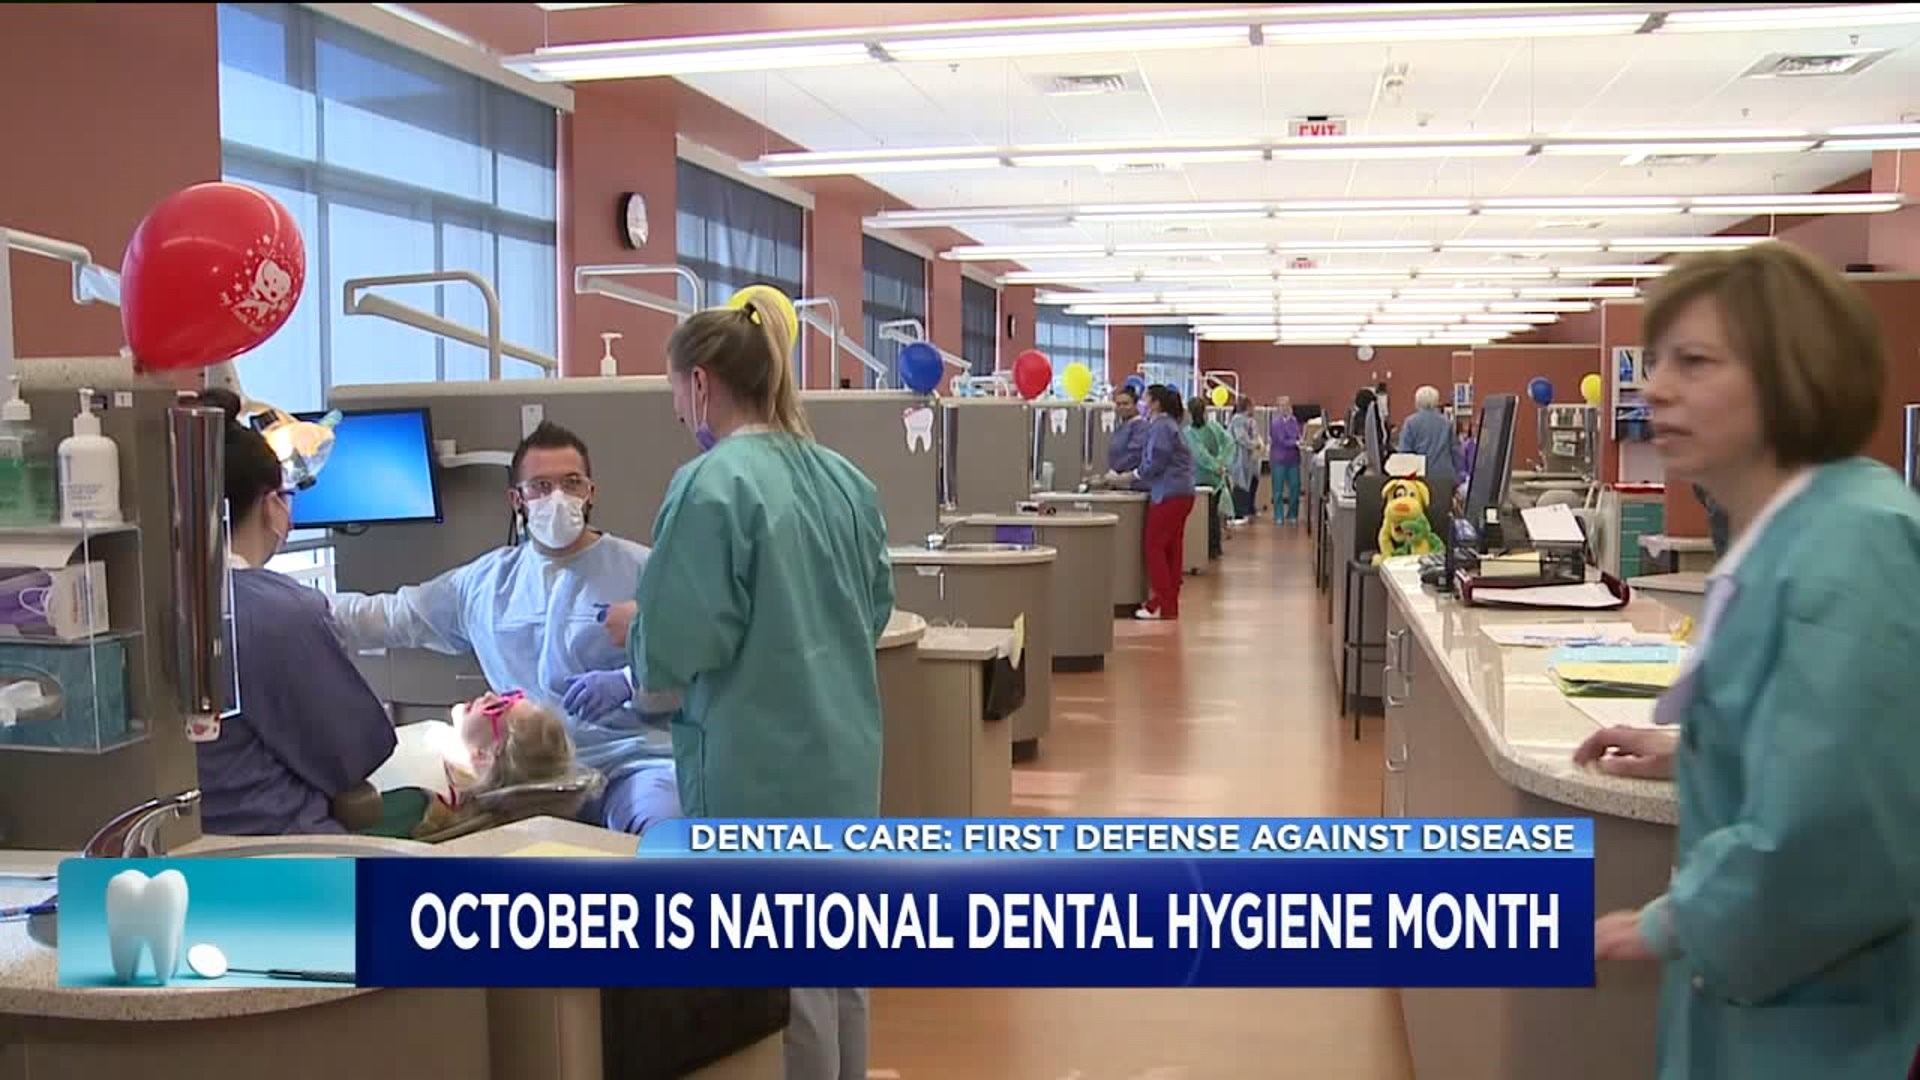 Low-Cost Clinic in Luzerne County Celebrates National Dental Hygiene Month